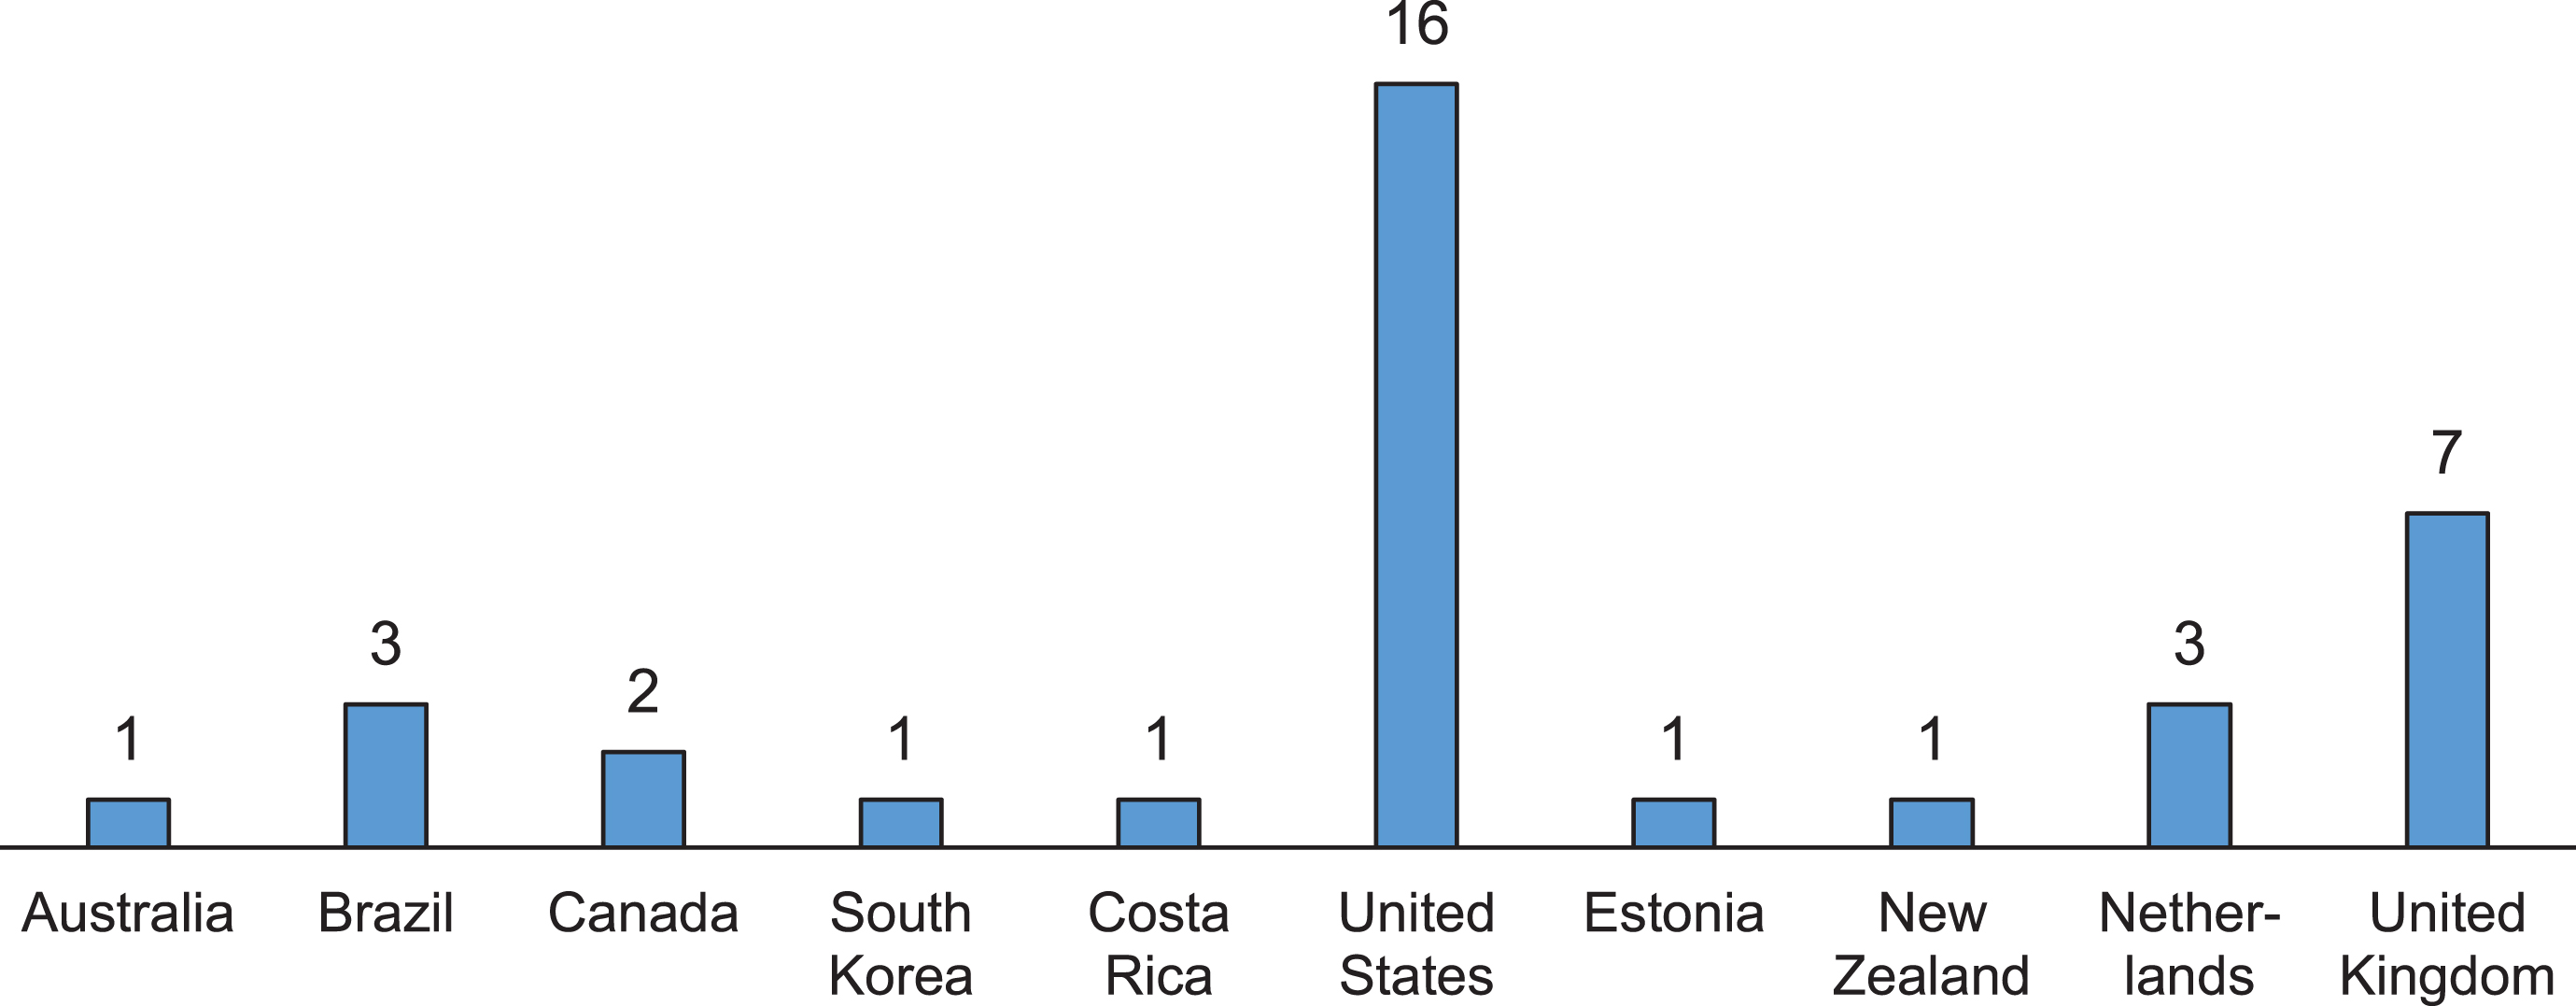 Distribution by countries of publications systematized in the review.